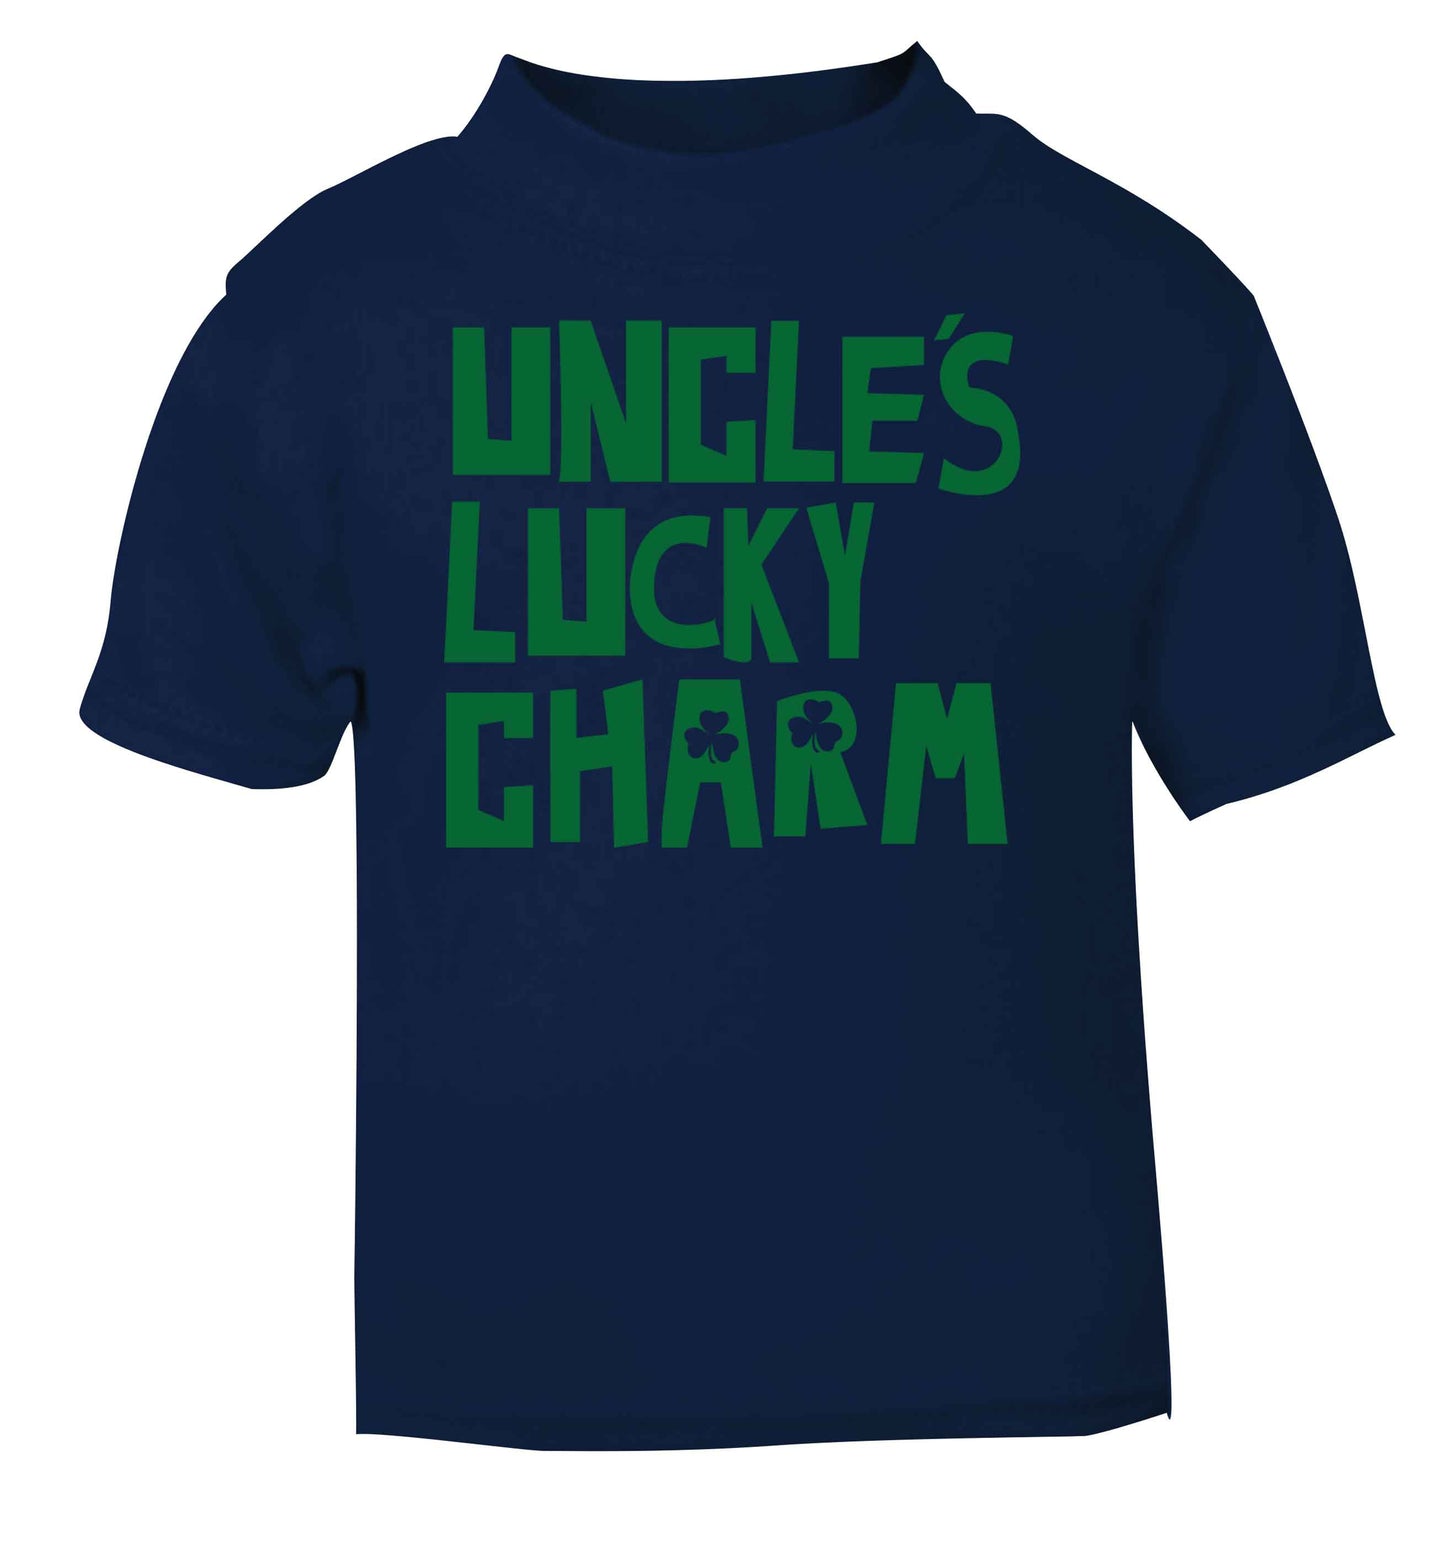 Uncles lucky charm navy baby toddler Tshirt 2 Years